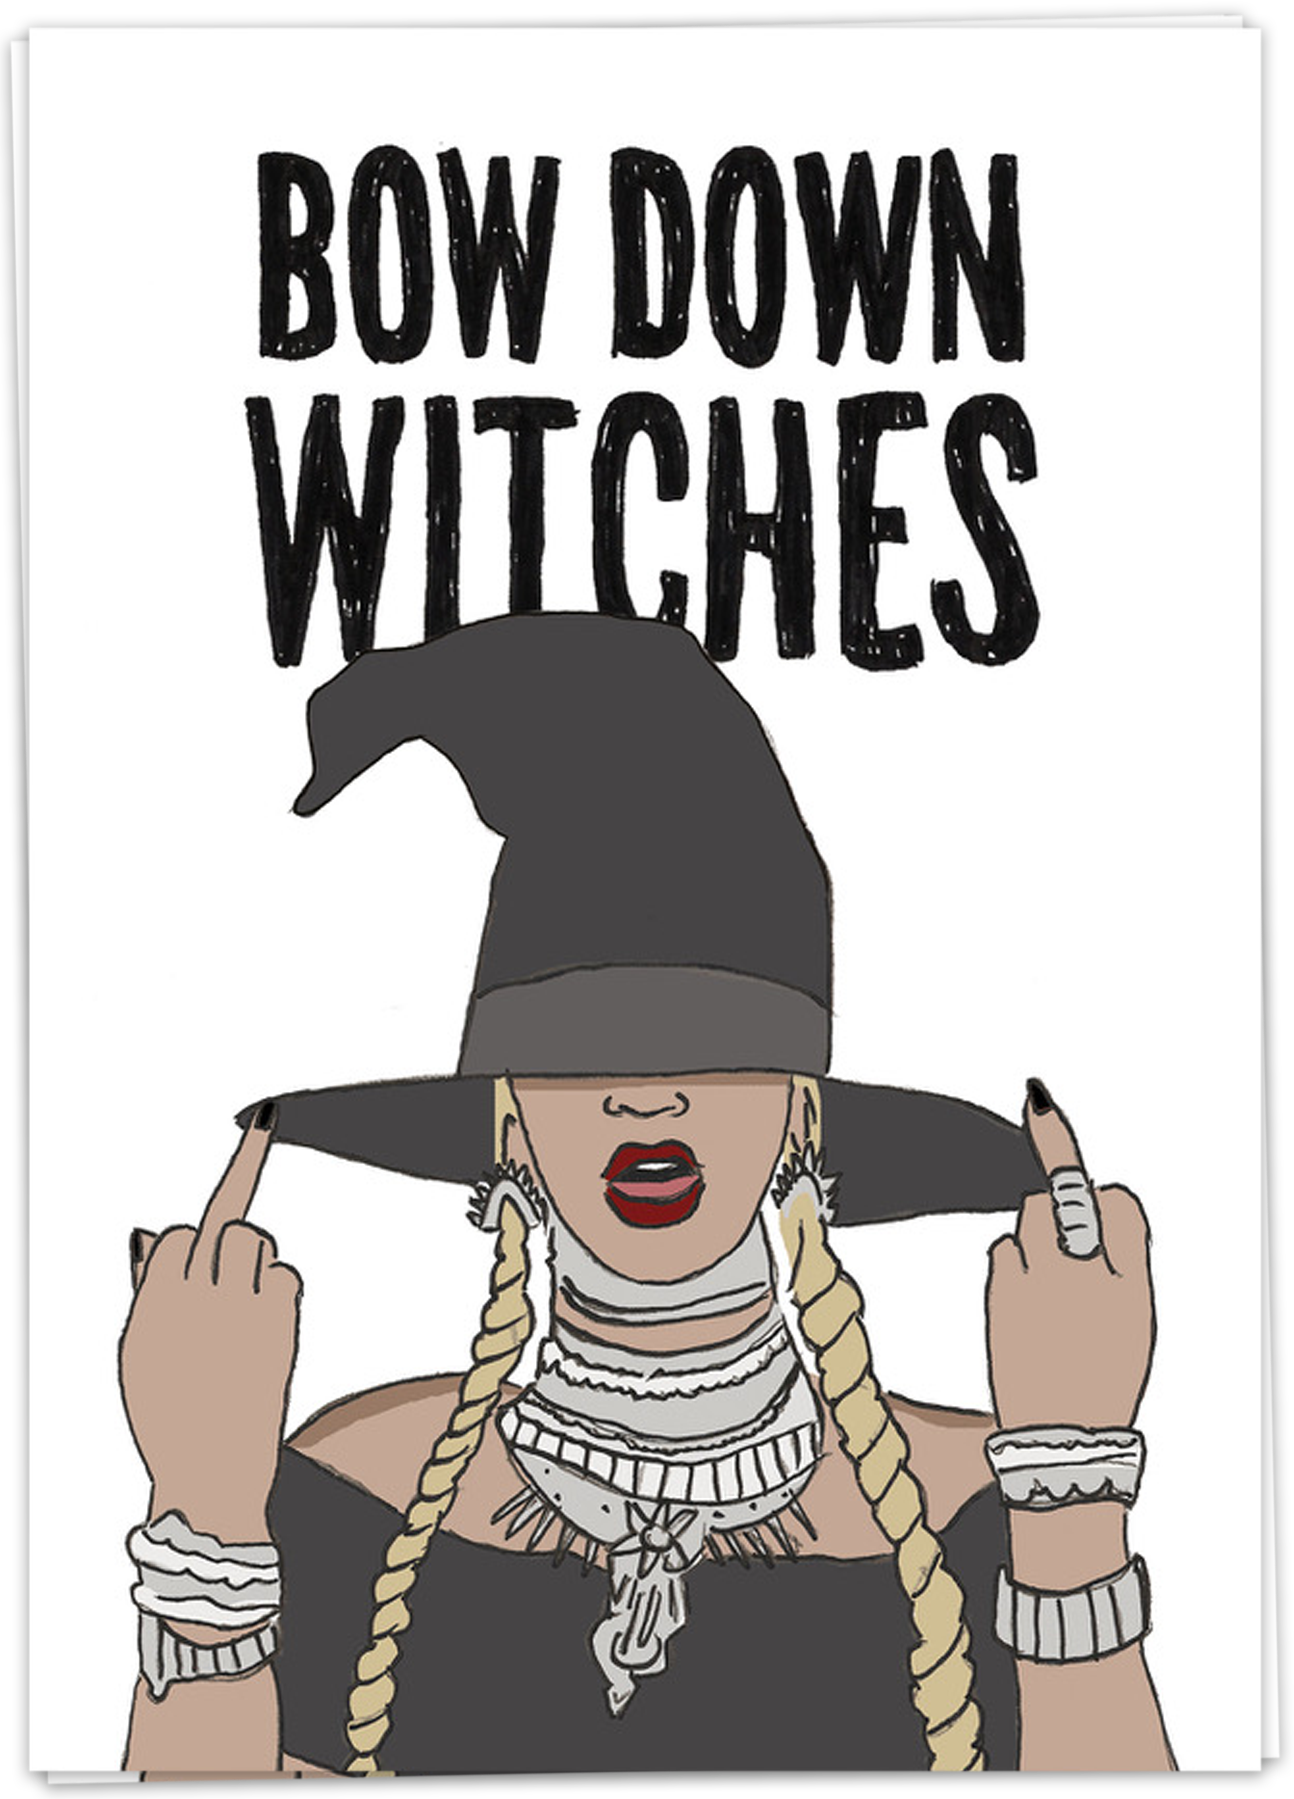 Bow down witches